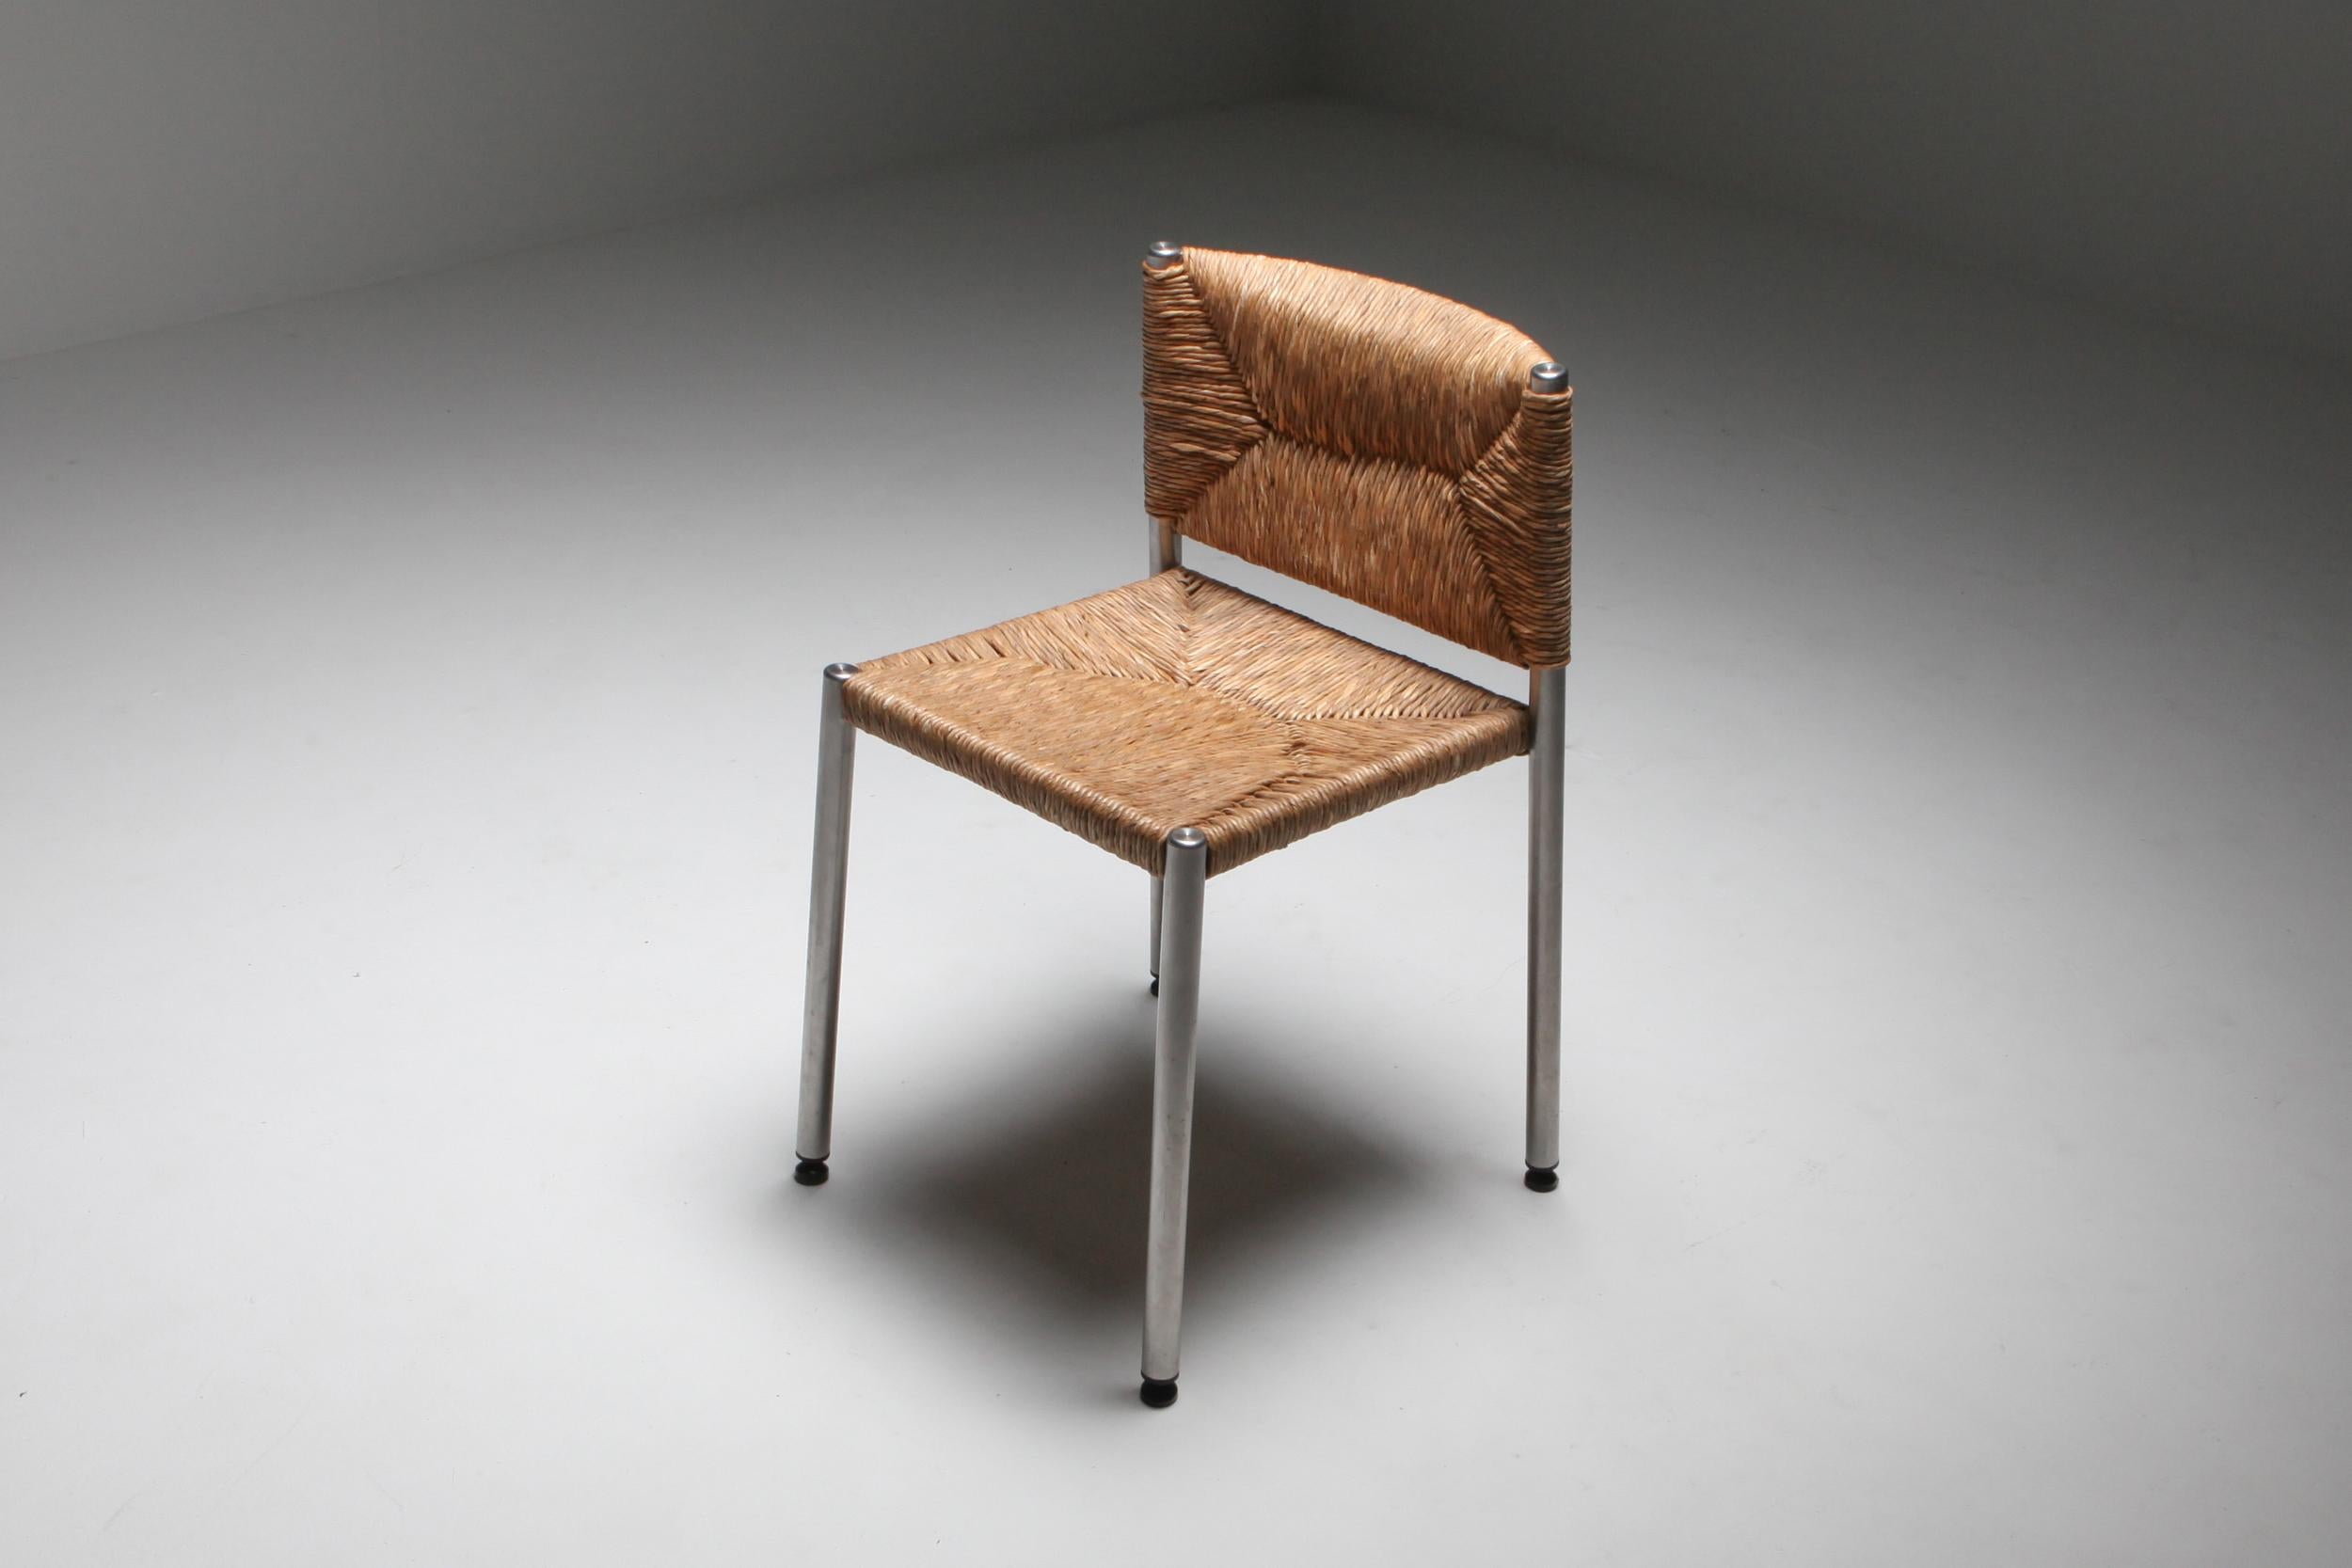 Contemporary Rustic Modern Chairs in Seagrass and Aluminum 1